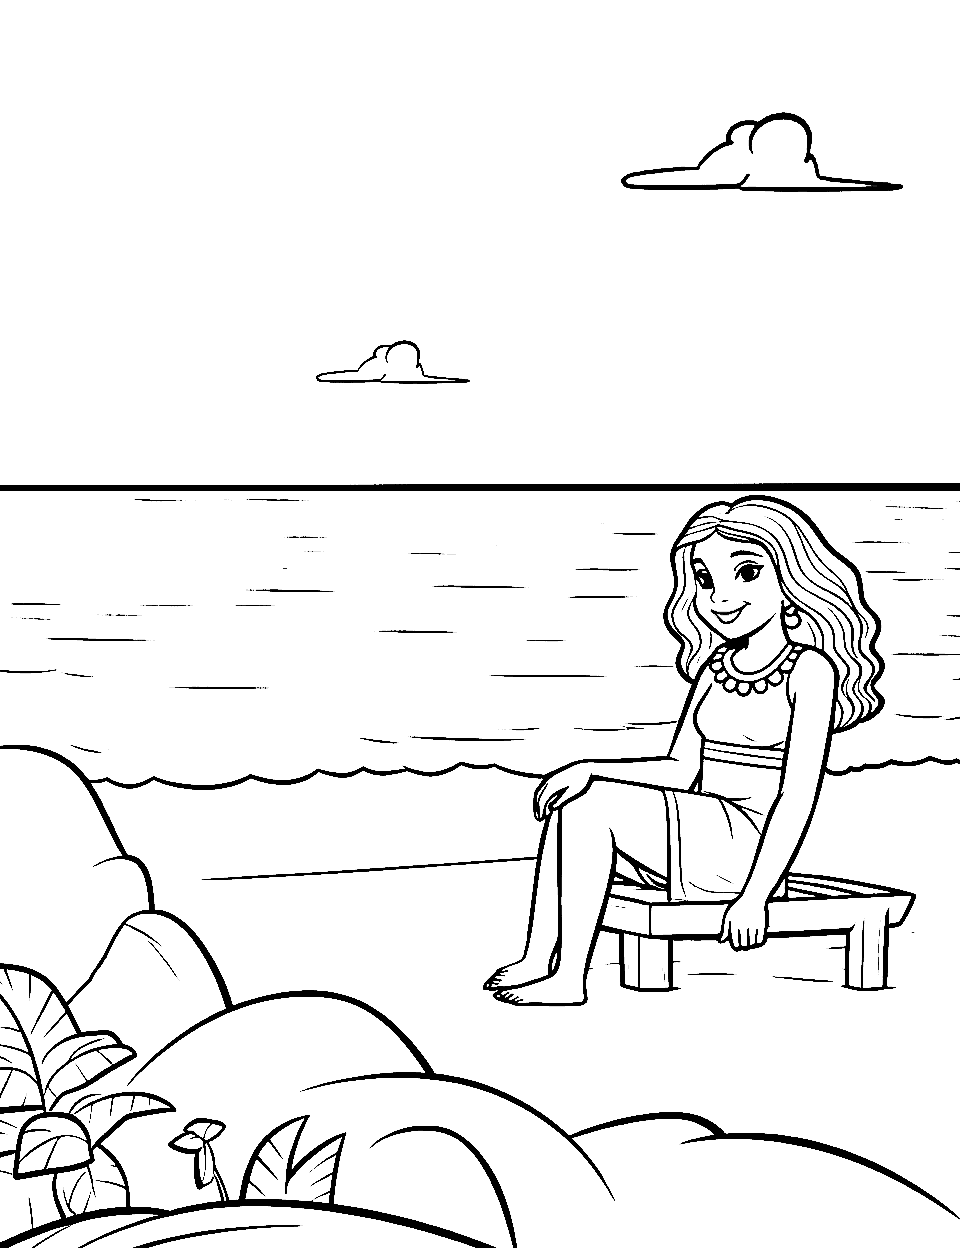 Disney's Moana on the Beach Coloring Page - Moana joyfully sitting on the beach with the ocean behind her.